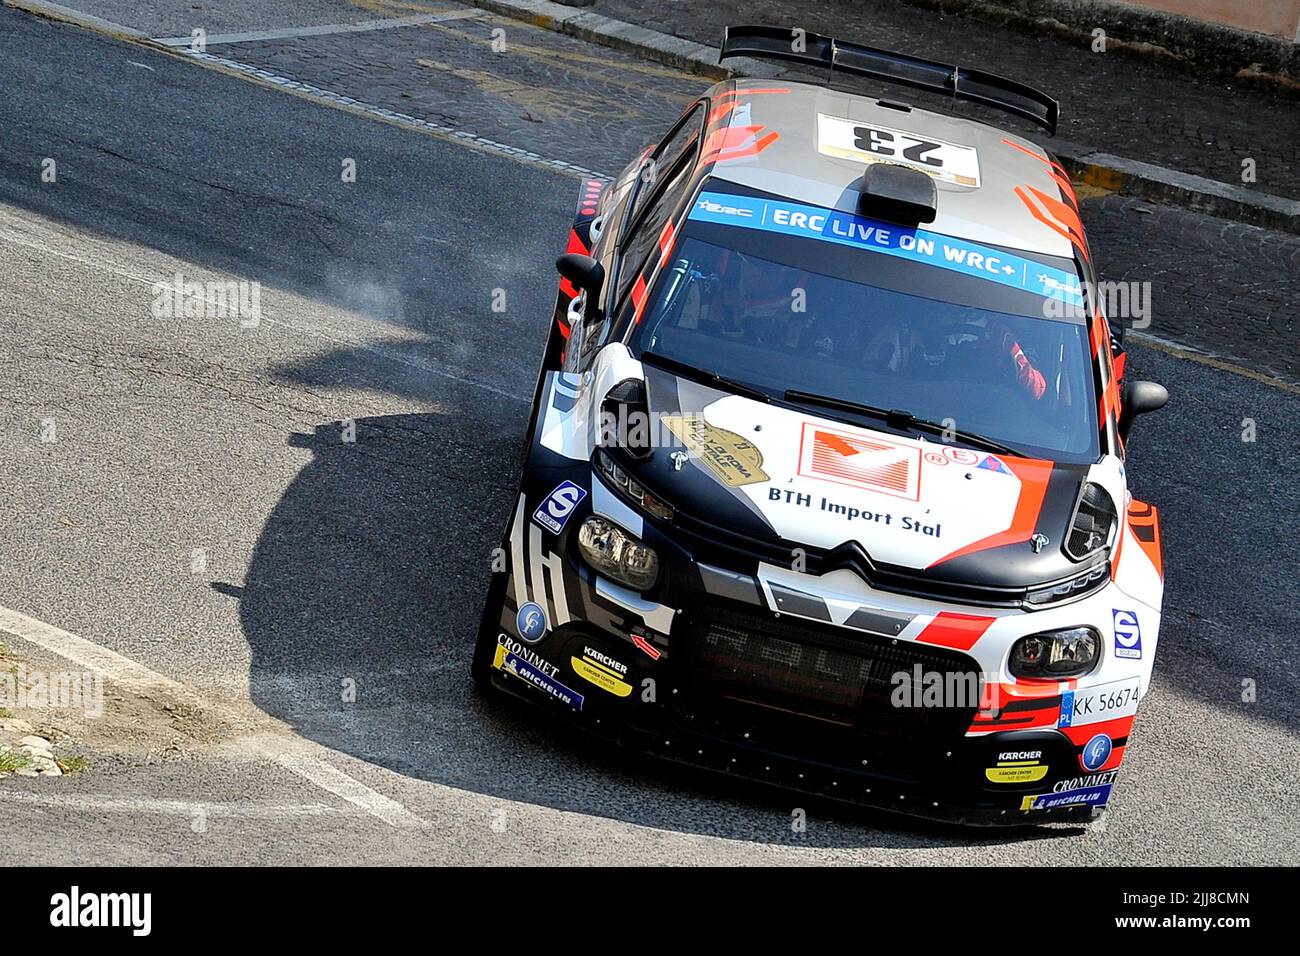 The driver Lukasz Kotarba and his Tomasz Kotarba aboard their Citroen C3 Rally2  car, during the Colle San Maro - Roccasecca stage of the 10 edition of the FIA European Rally Championship 'Rally di Roma Capitale' which was held in the Lazio region. Santopadre, Italy, 23 July 2022. (photo by Vincenzo Izzo/Sipa USA) Stock Photo